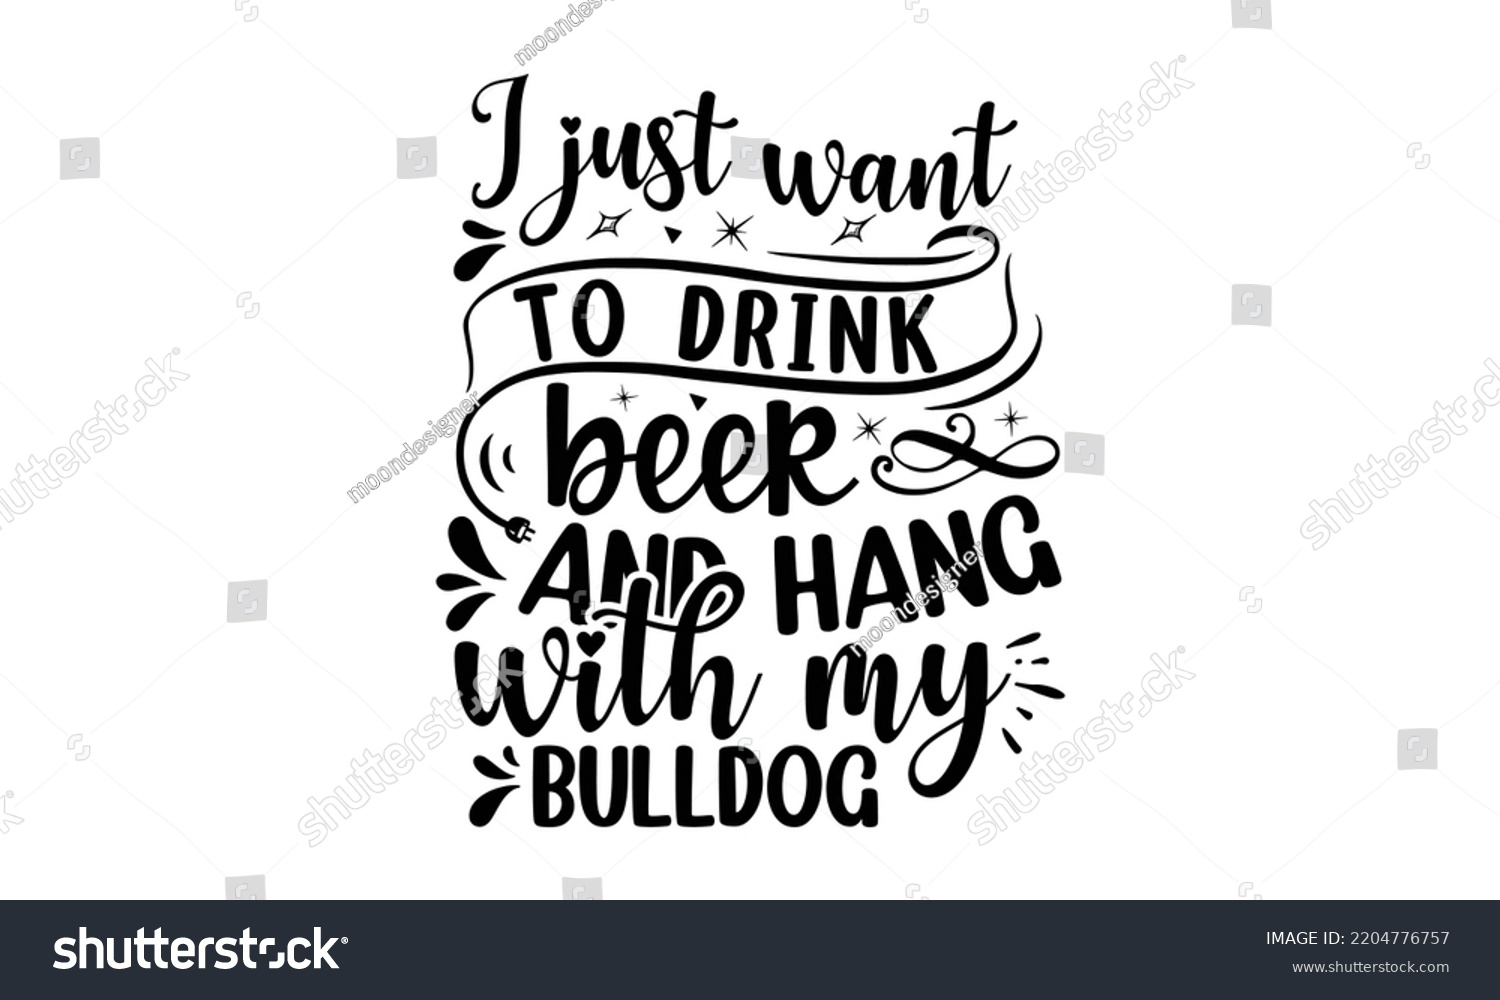 SVG of I just want to drink beer and hang with my bulldog - Bullodog T-shirt and SVG Design,  Dog lover t shirt design gift for women, typography design, can you download this Design, svg Files for Cutting  svg